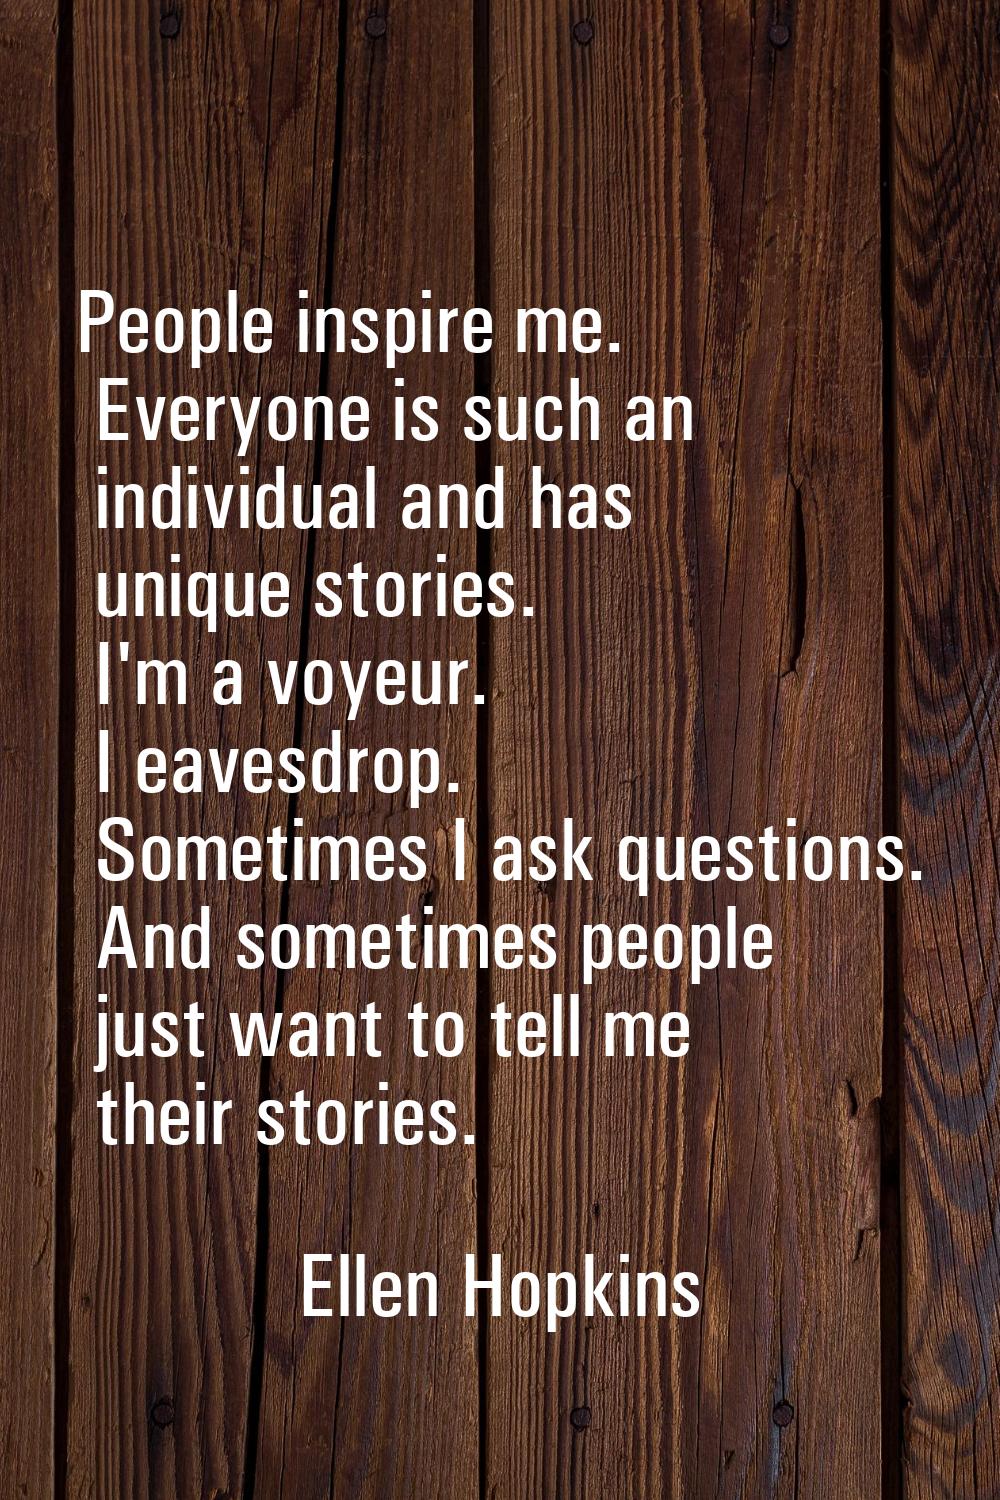 People inspire me. Everyone is such an individual and has unique stories. I'm a voyeur. I eavesdrop